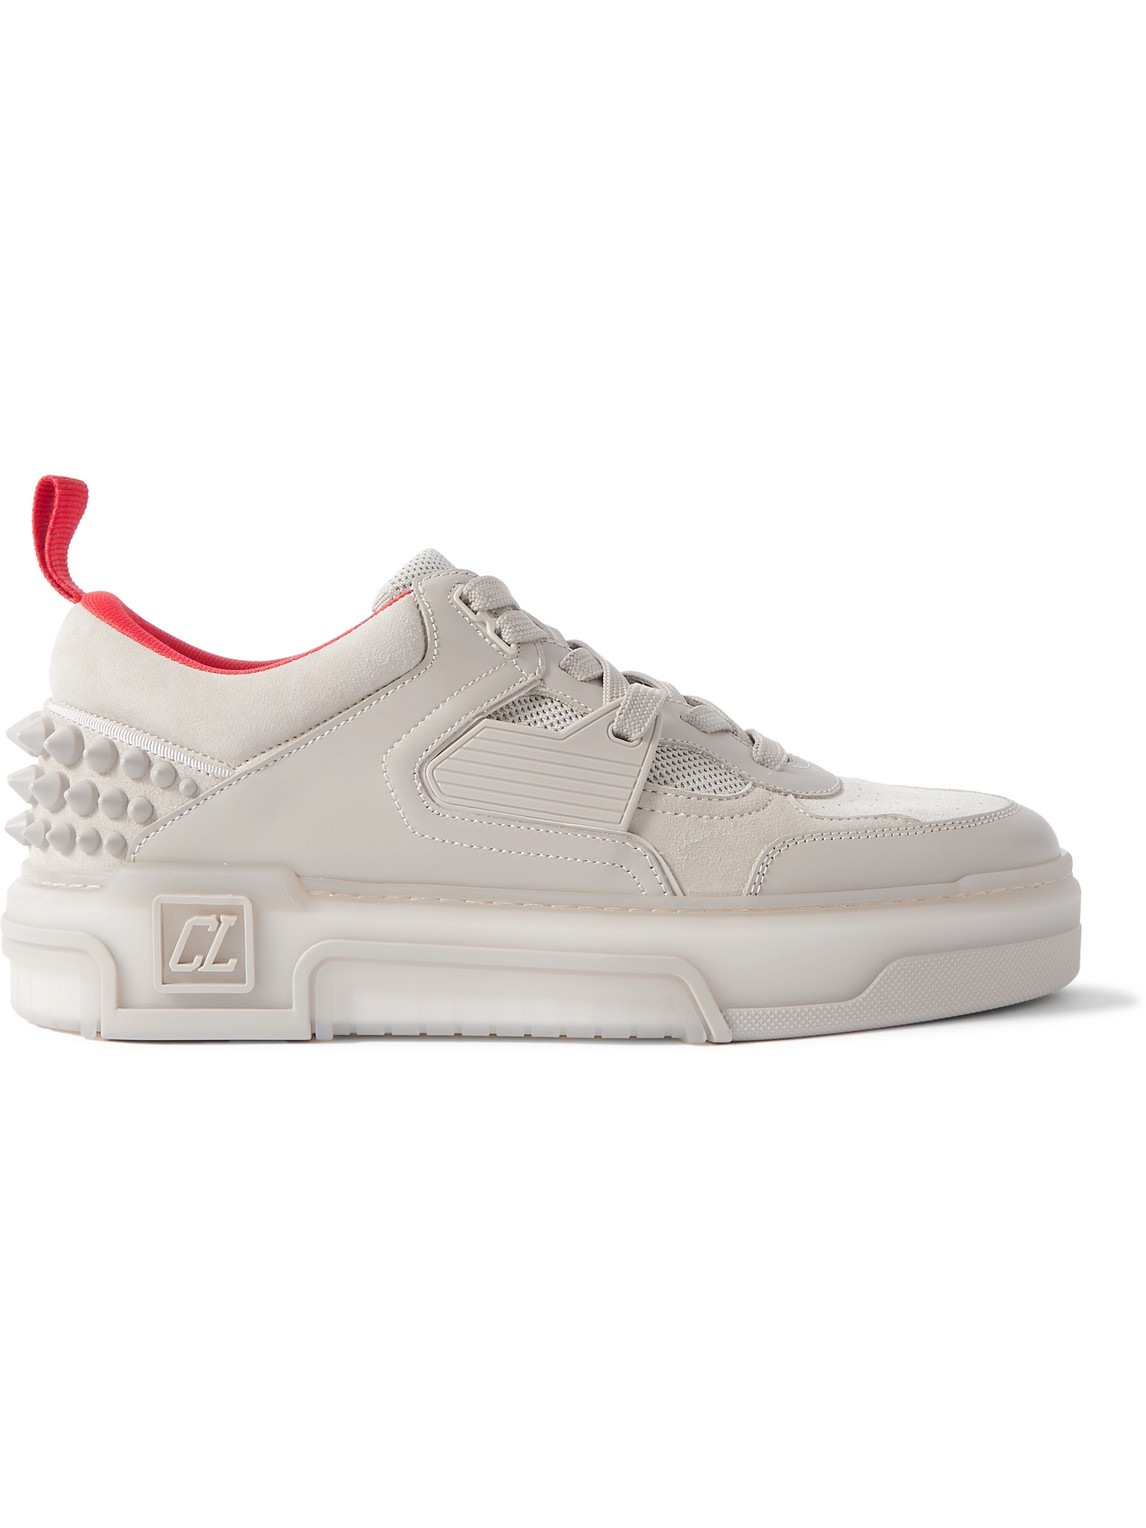 Christian Louboutin Astroloubi Spiked Leather, Suede And Mesh Sneakers In Neutrals